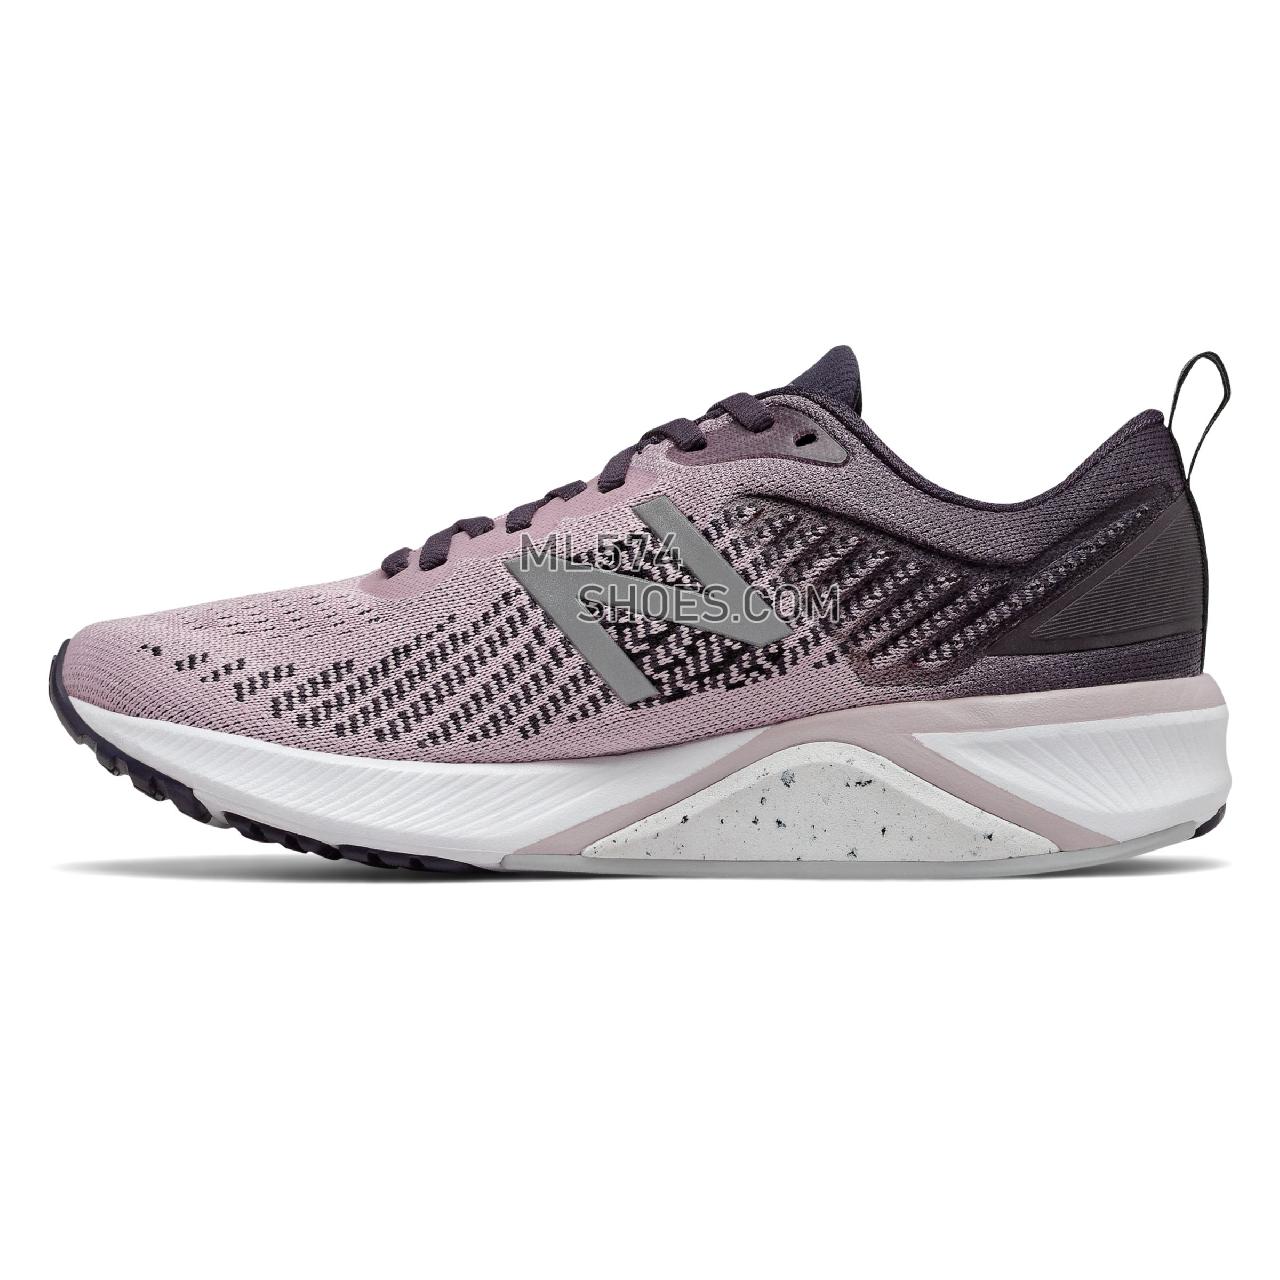 New Balance 870v5 - Women's Stability Running - Oxygen Pink with Iodine Violet - W870RP5